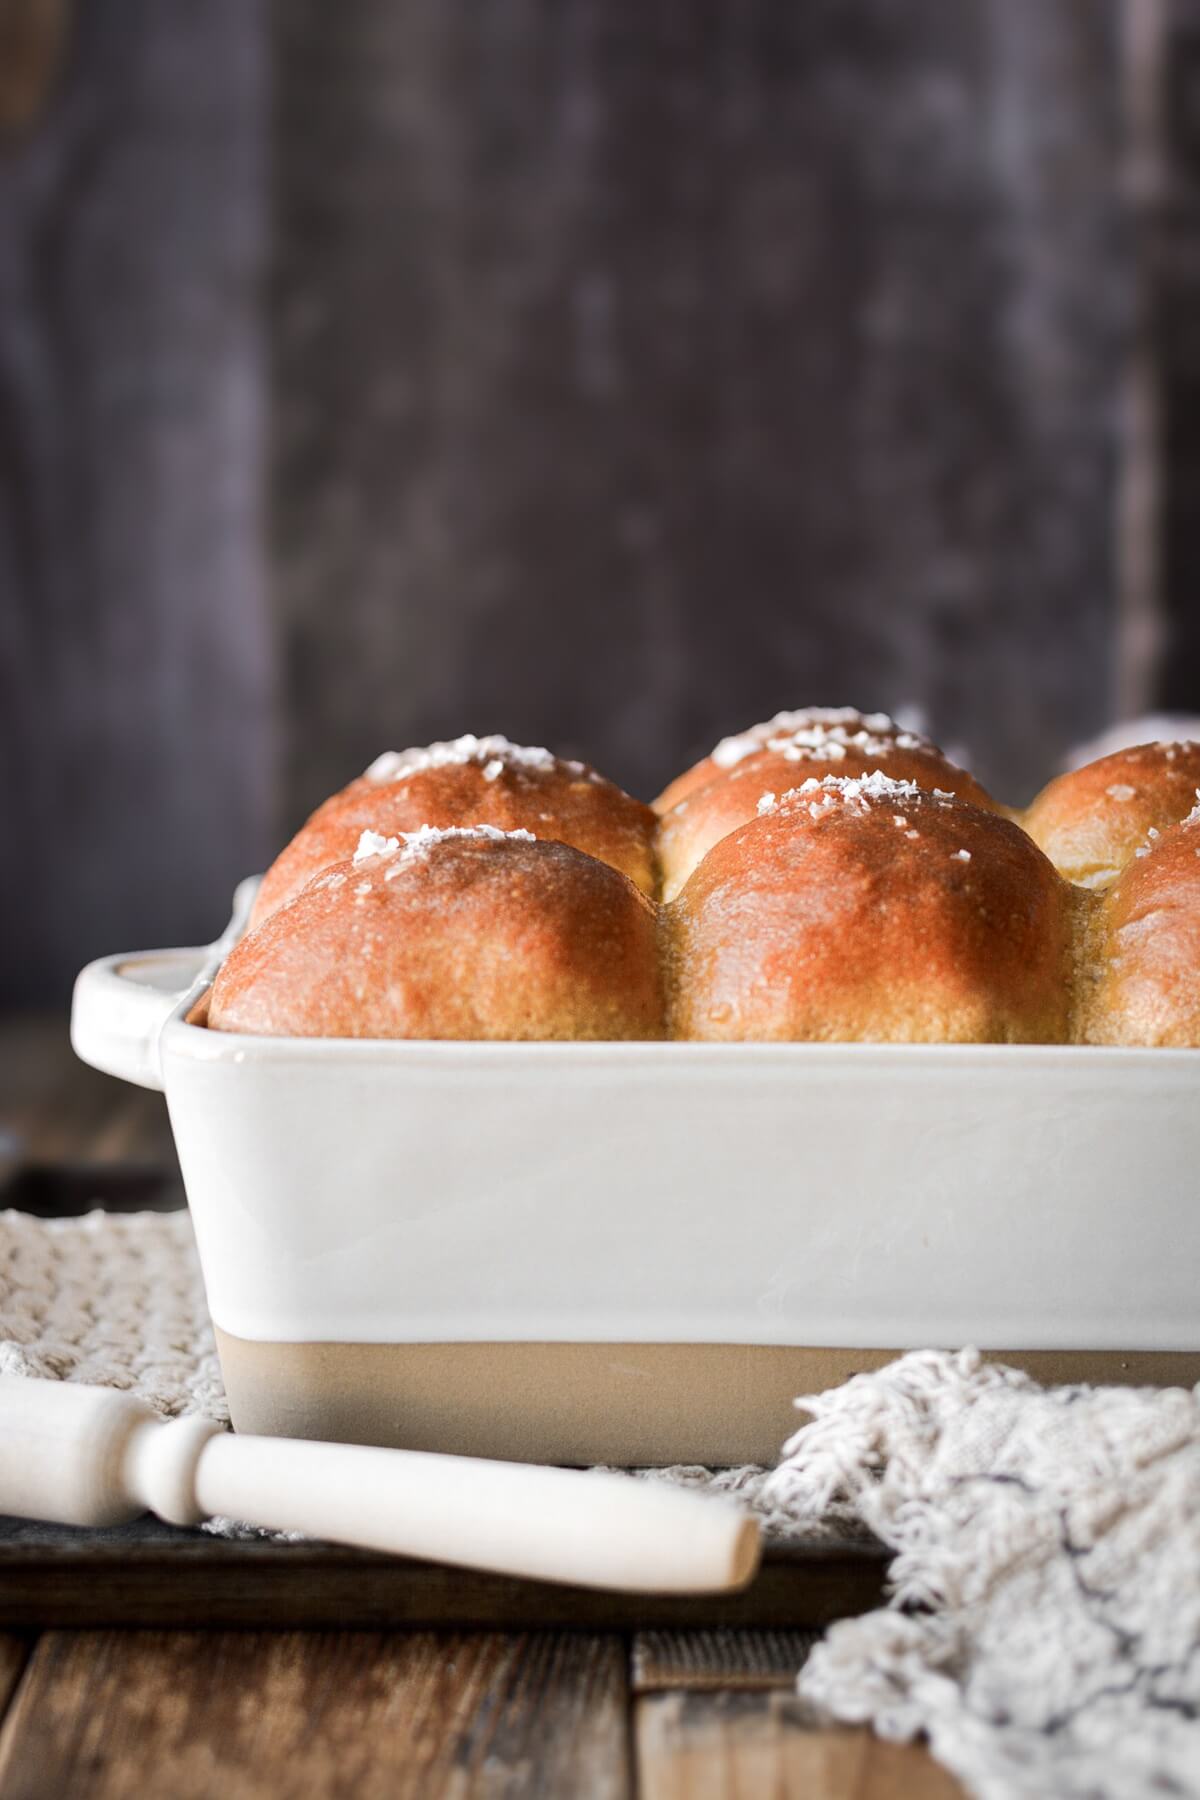 Homemade rolls in a baking dish.